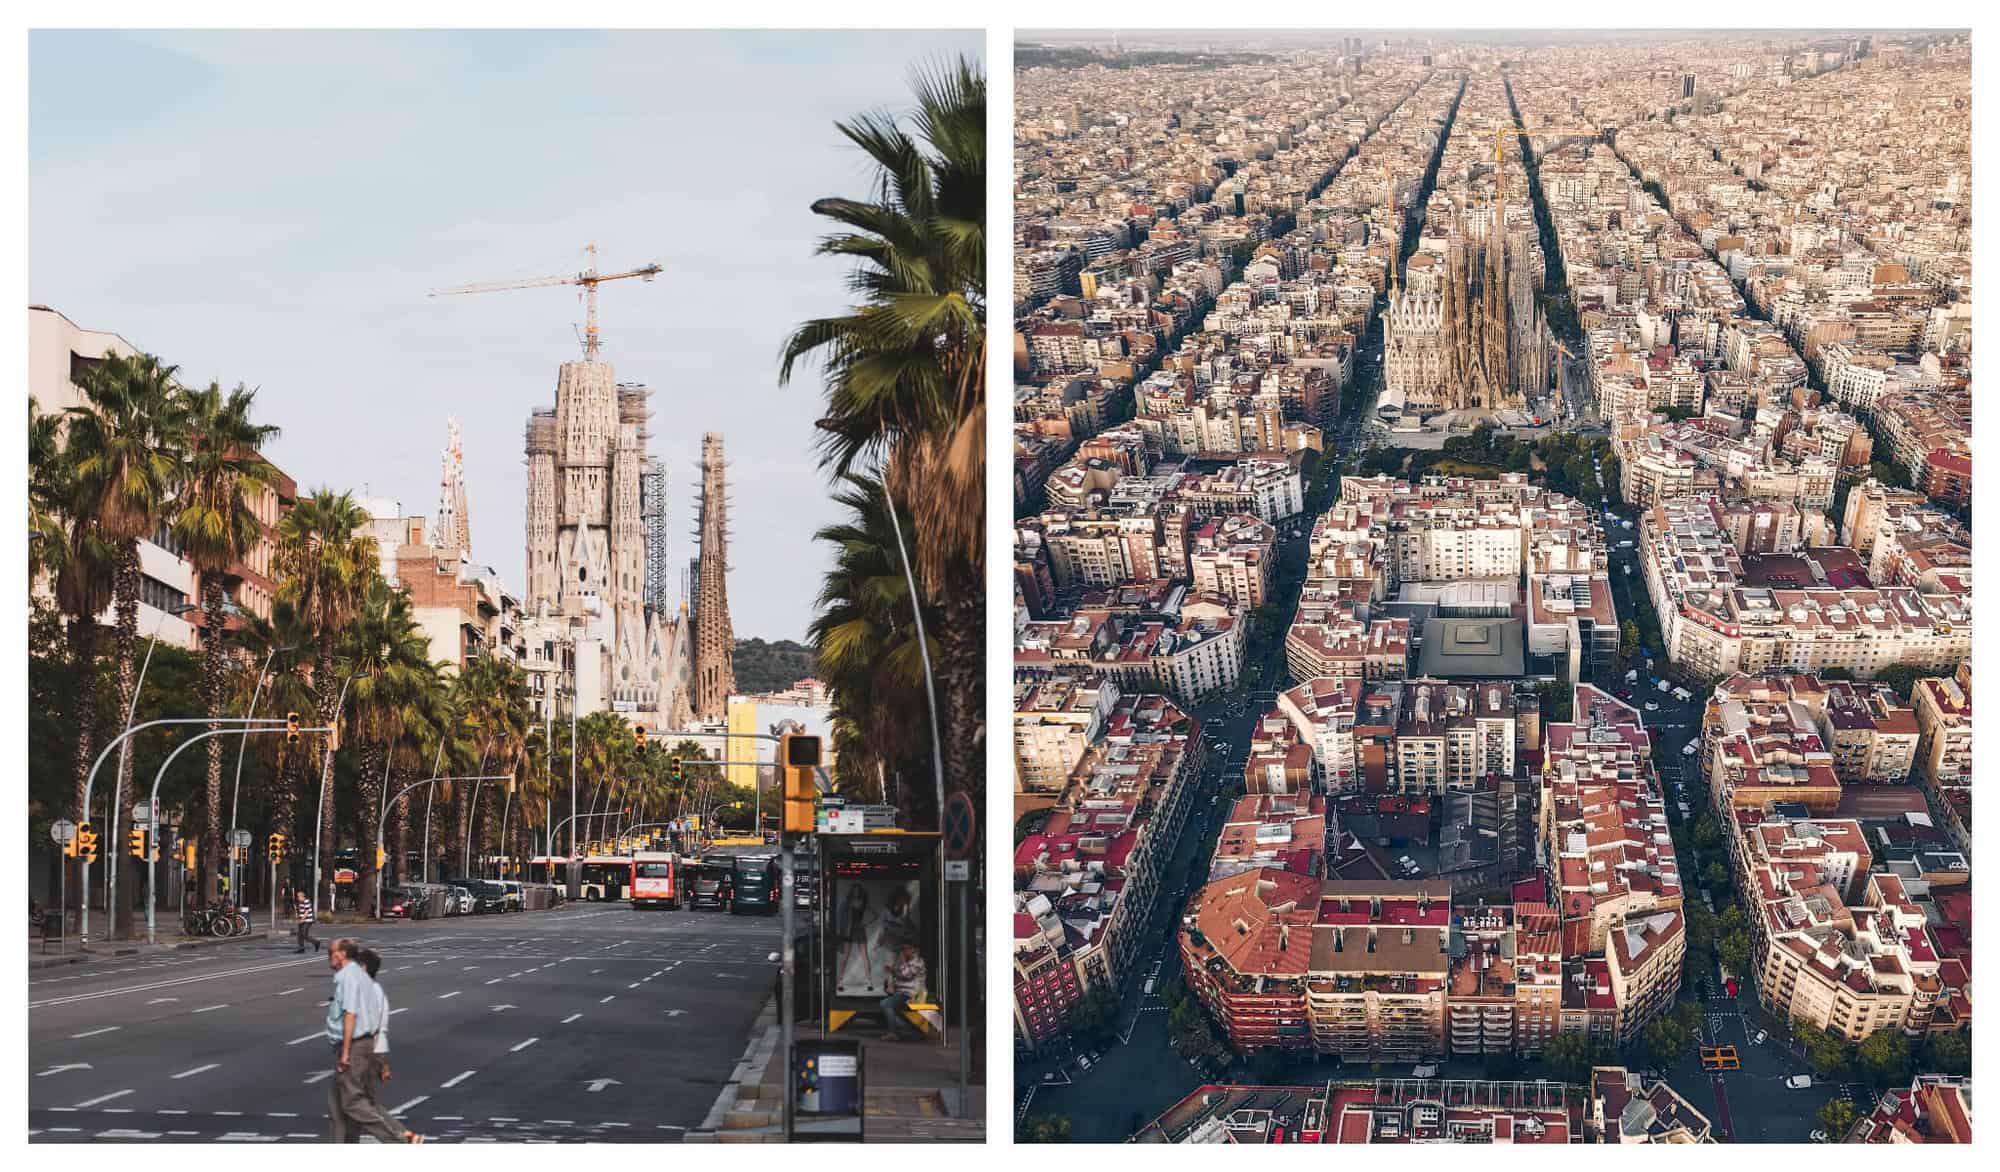 Left: A man and a woman crosses the street with a view of a tall basilica. Right: A bird's eye view of Barcelona's super blocks.